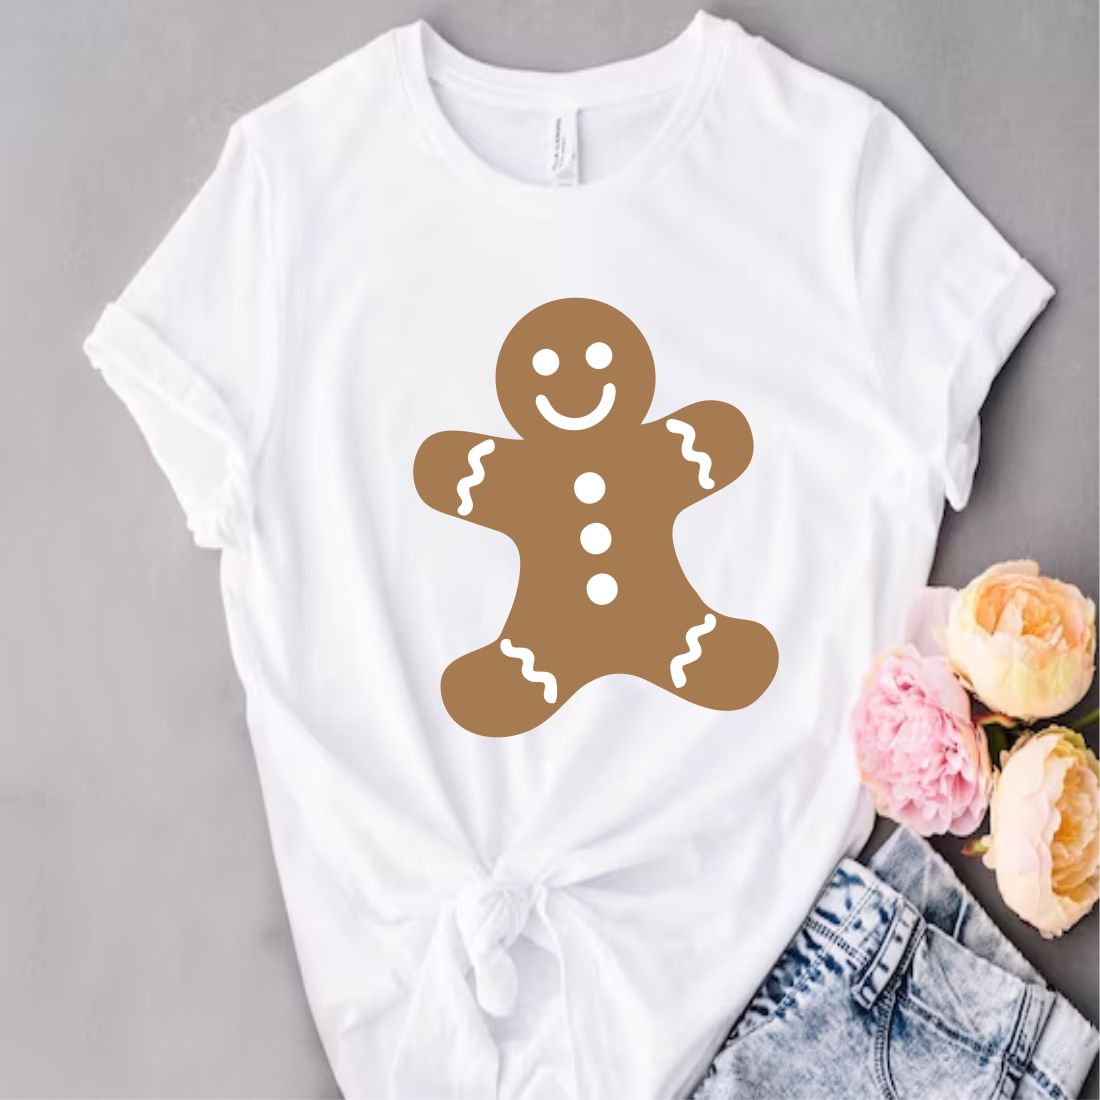 Gingerbread Svg, Gingerbread, Gingerbread eps, Gingerbread Outline Png, Gingerbread Monogram Png, Instant Download Vector Cut file Cricut, Silhouette, Pdf Png, Dxf, Decal preview image.